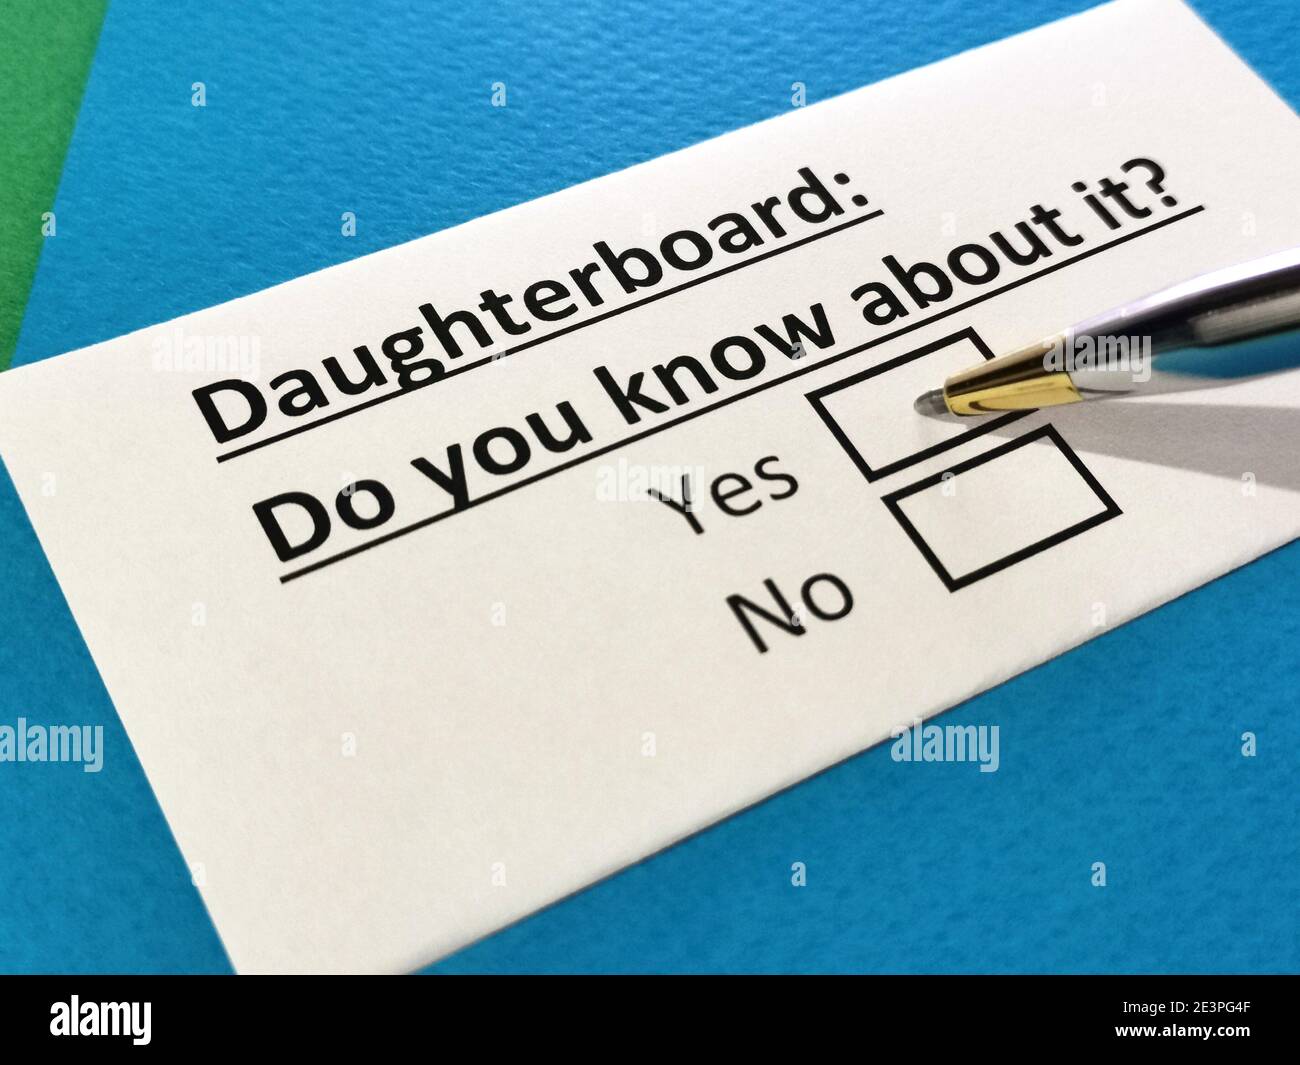 One person is answering question about daughterboard. Stock Photo